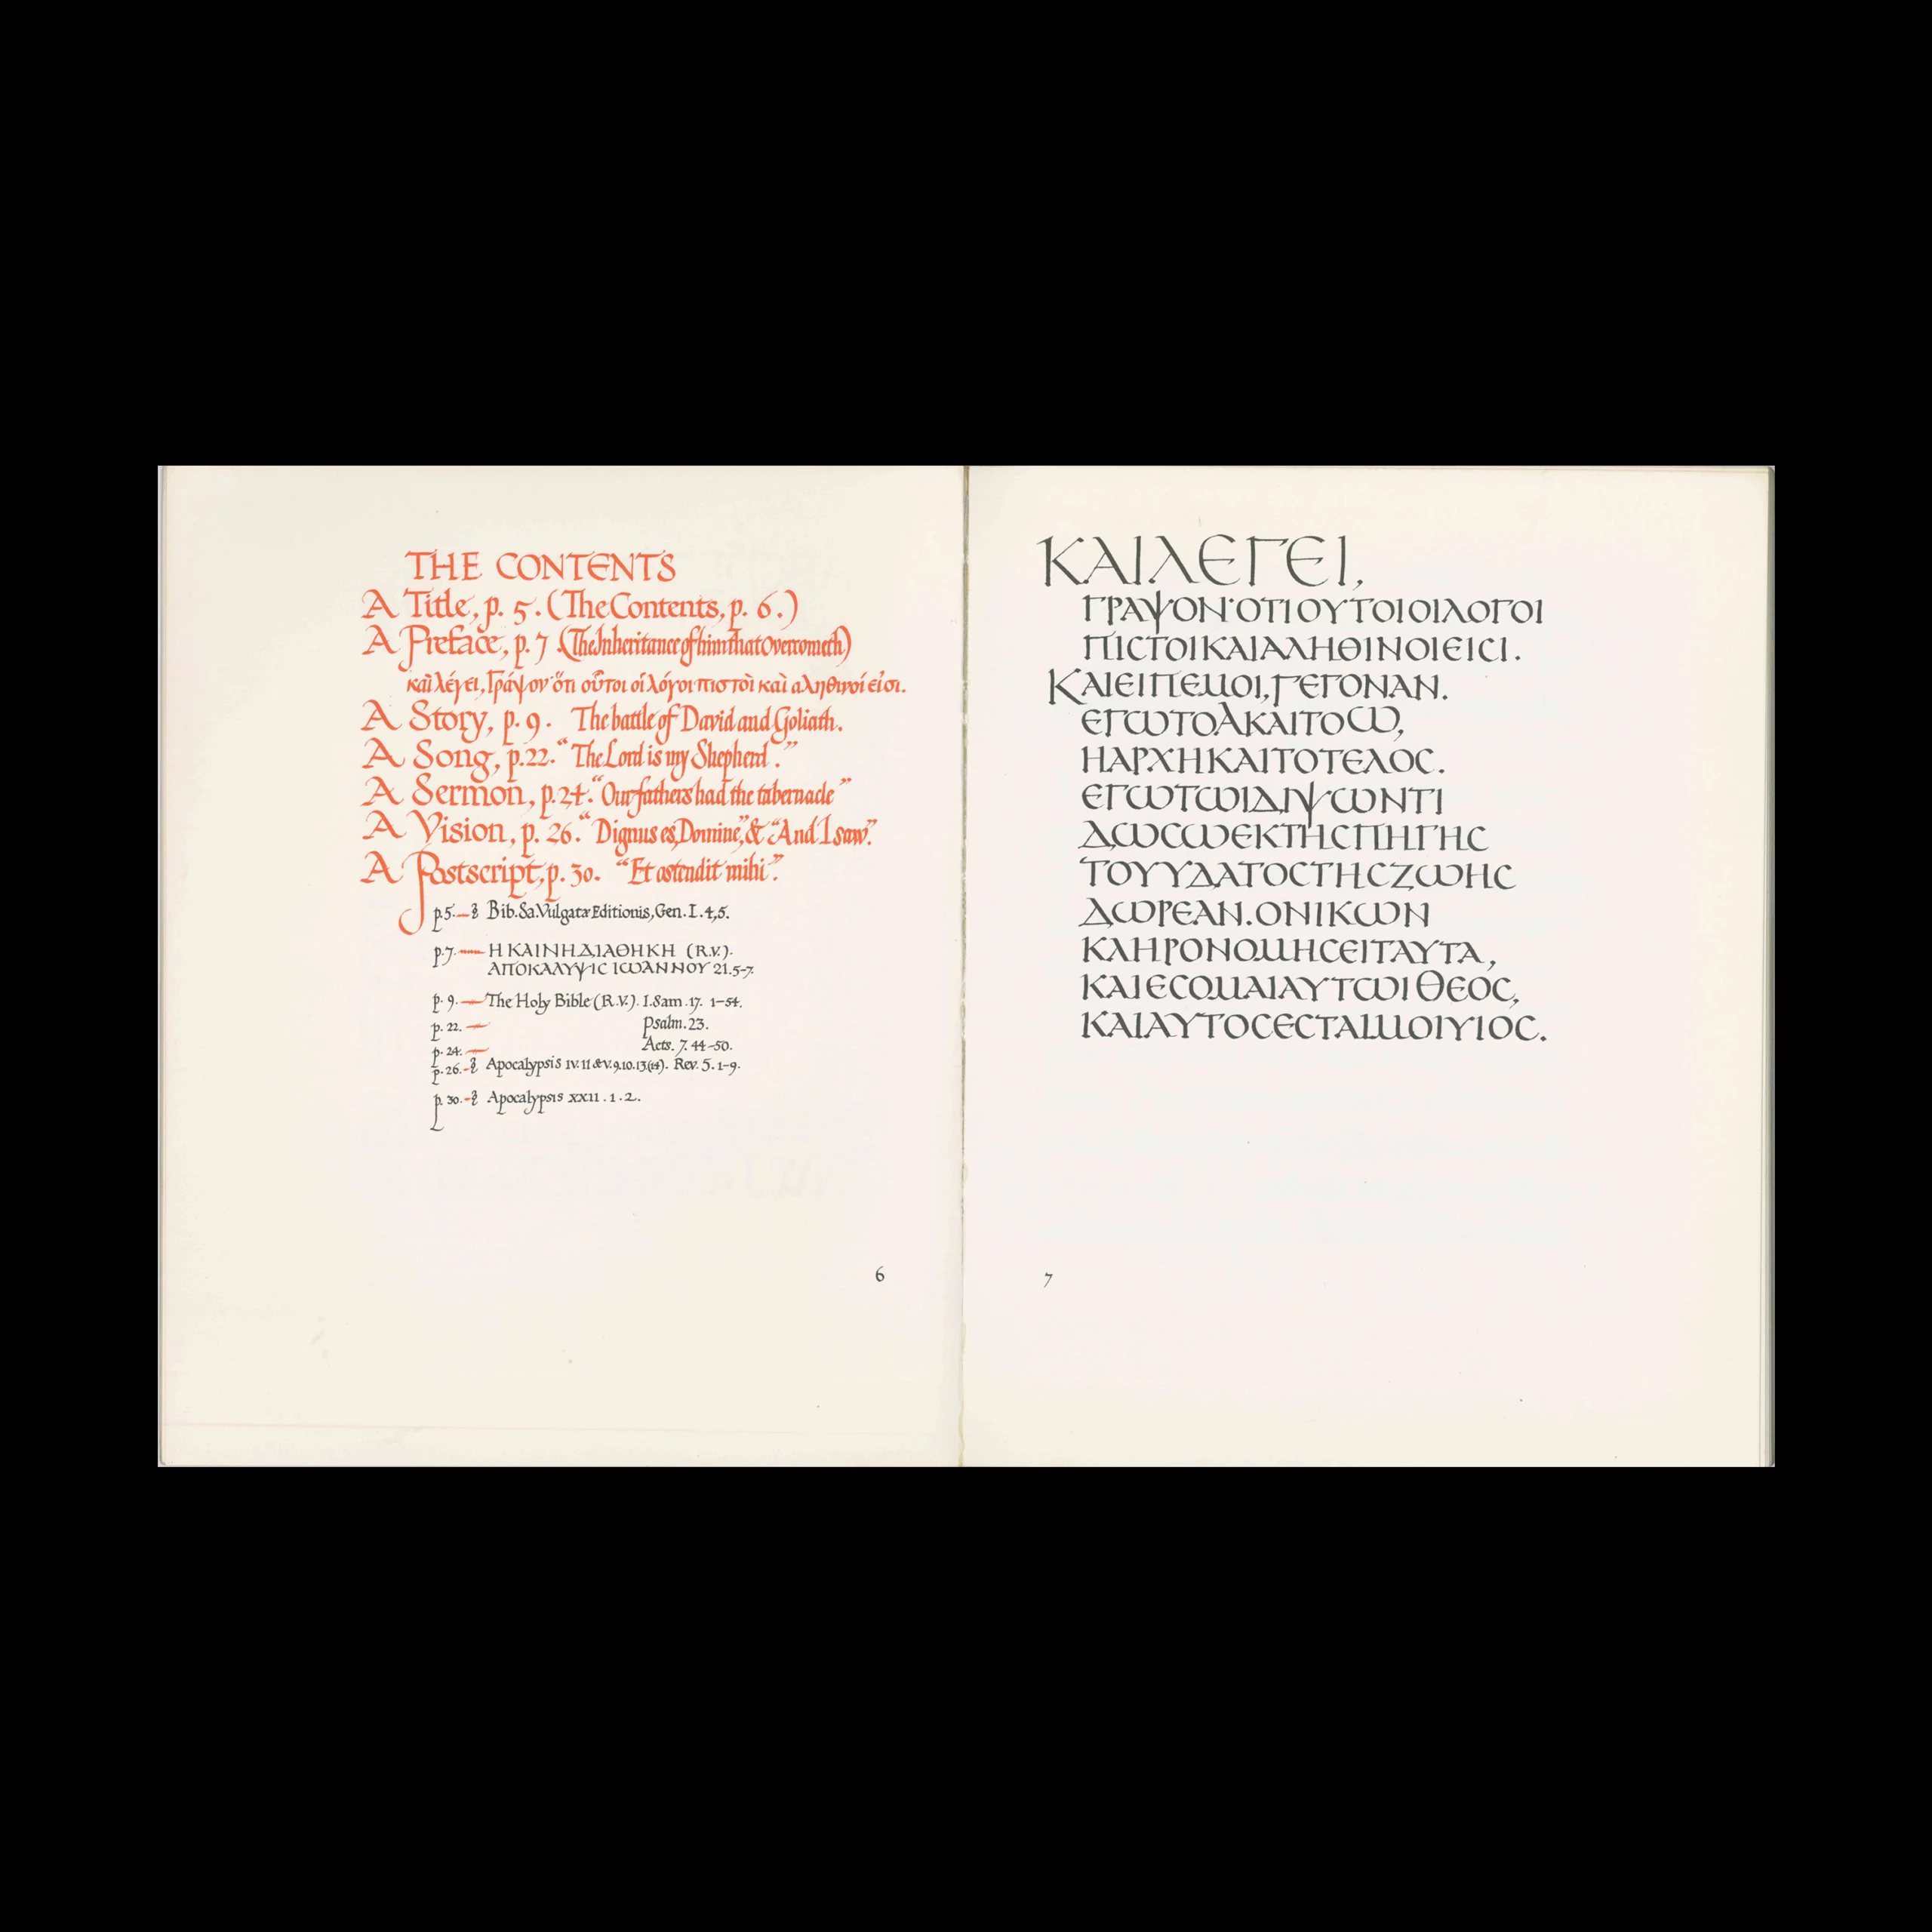 Edward Johnston's Book of Sample Scripts, Victoria and Albert Museum, 1966